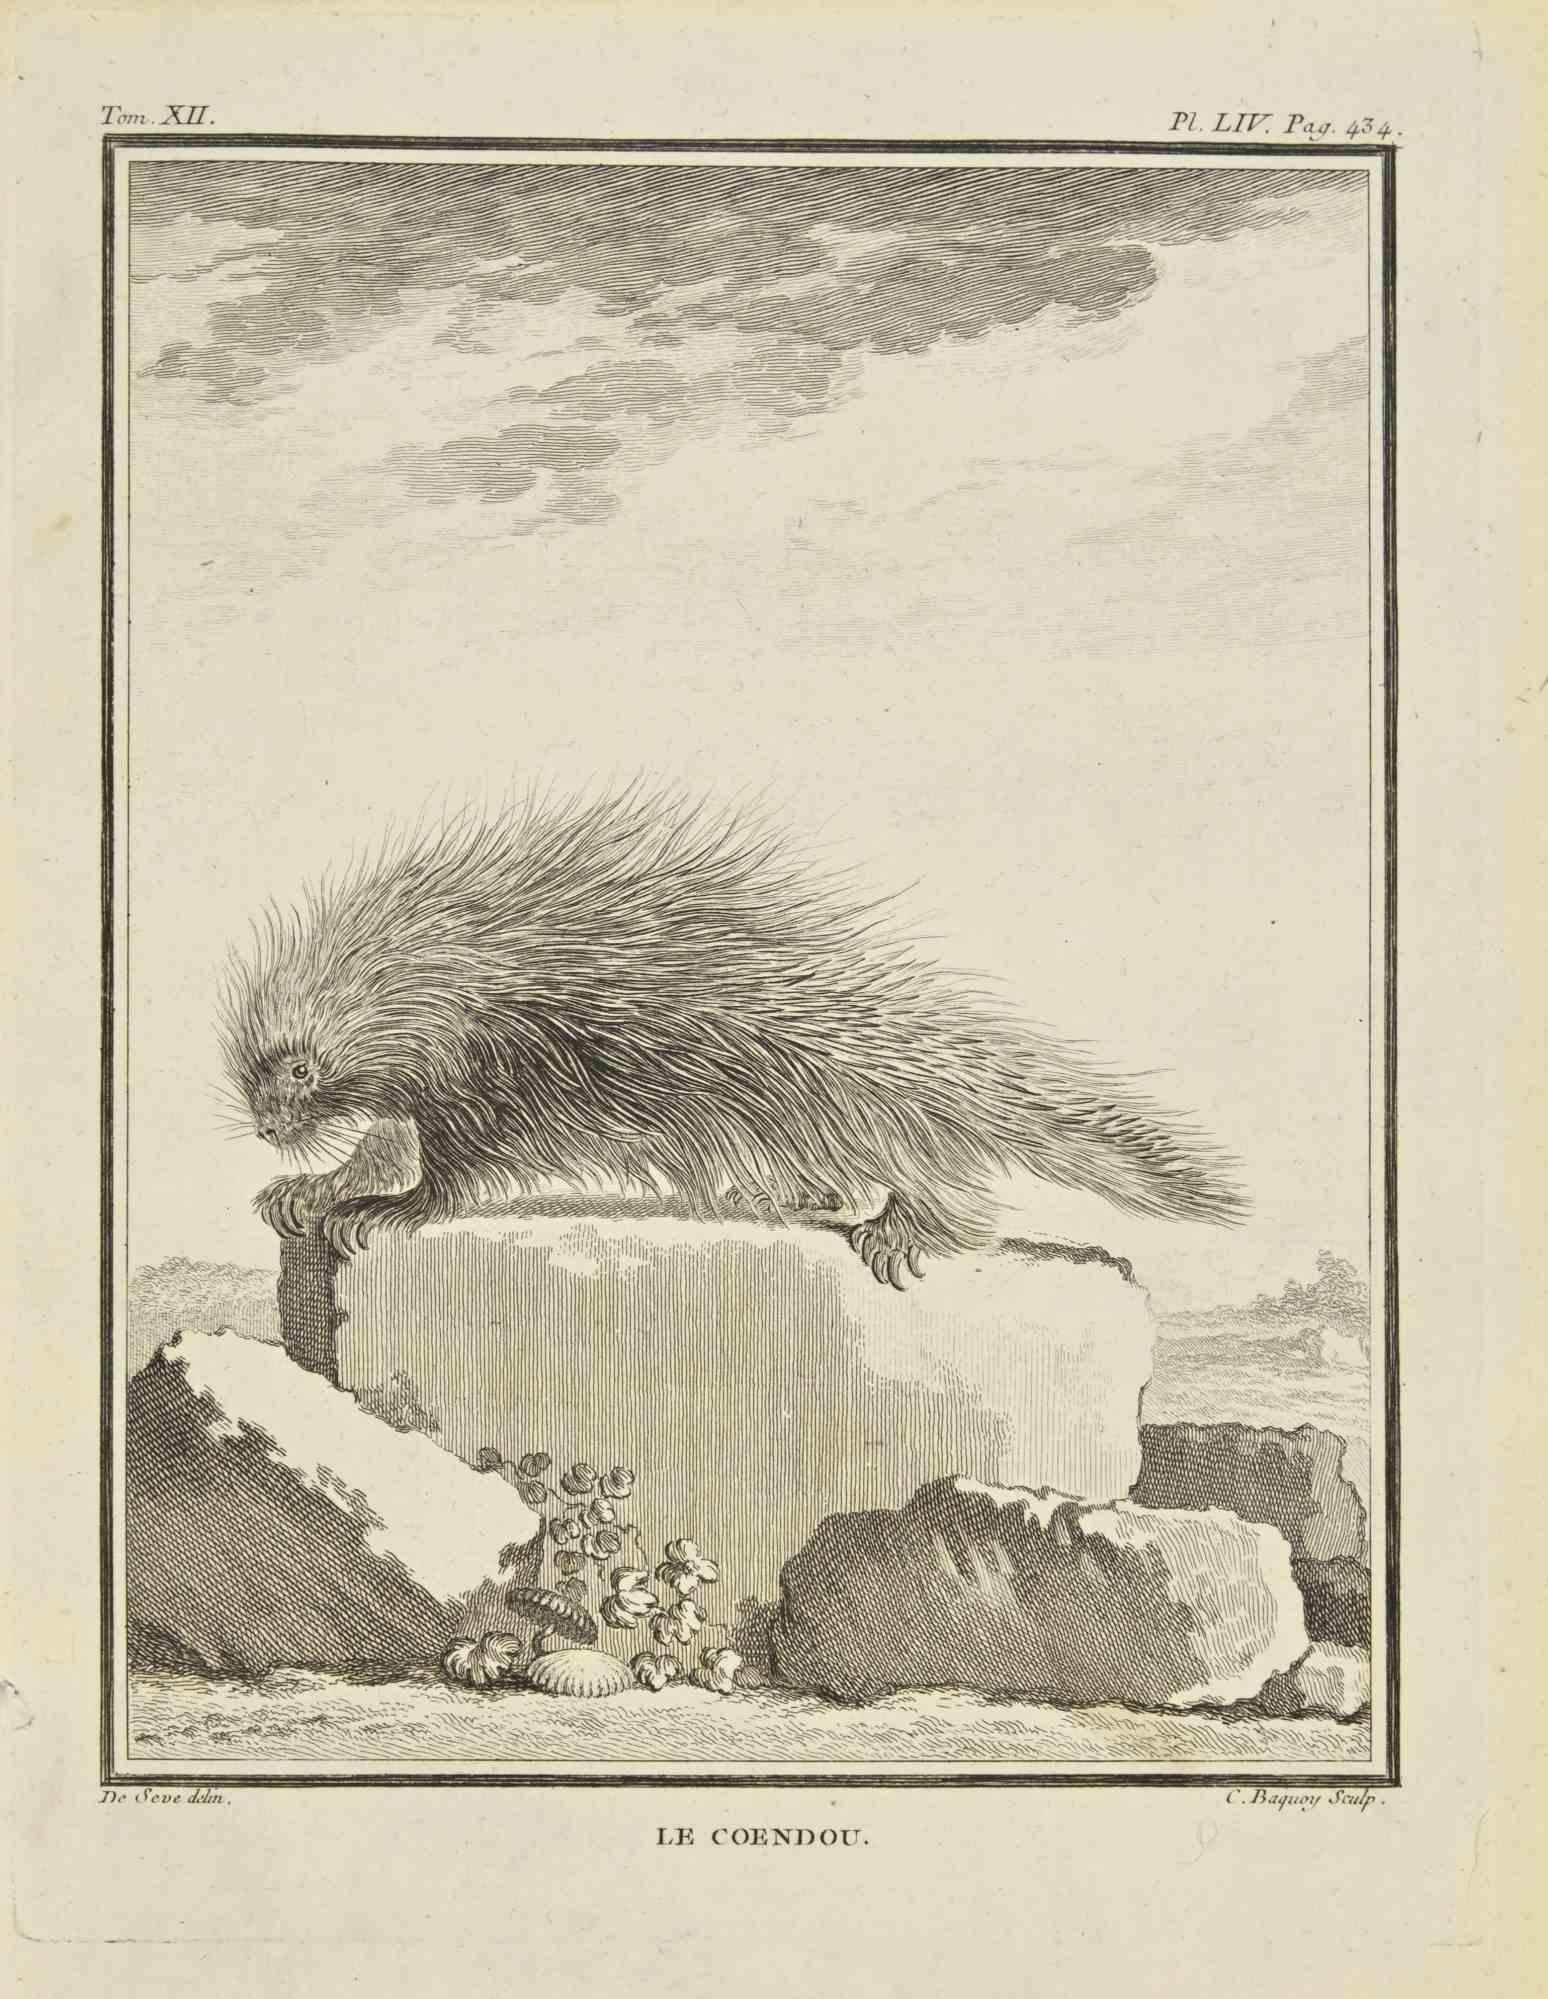 Le Coendou - Etching by Jean Charles Baquoy - 1771